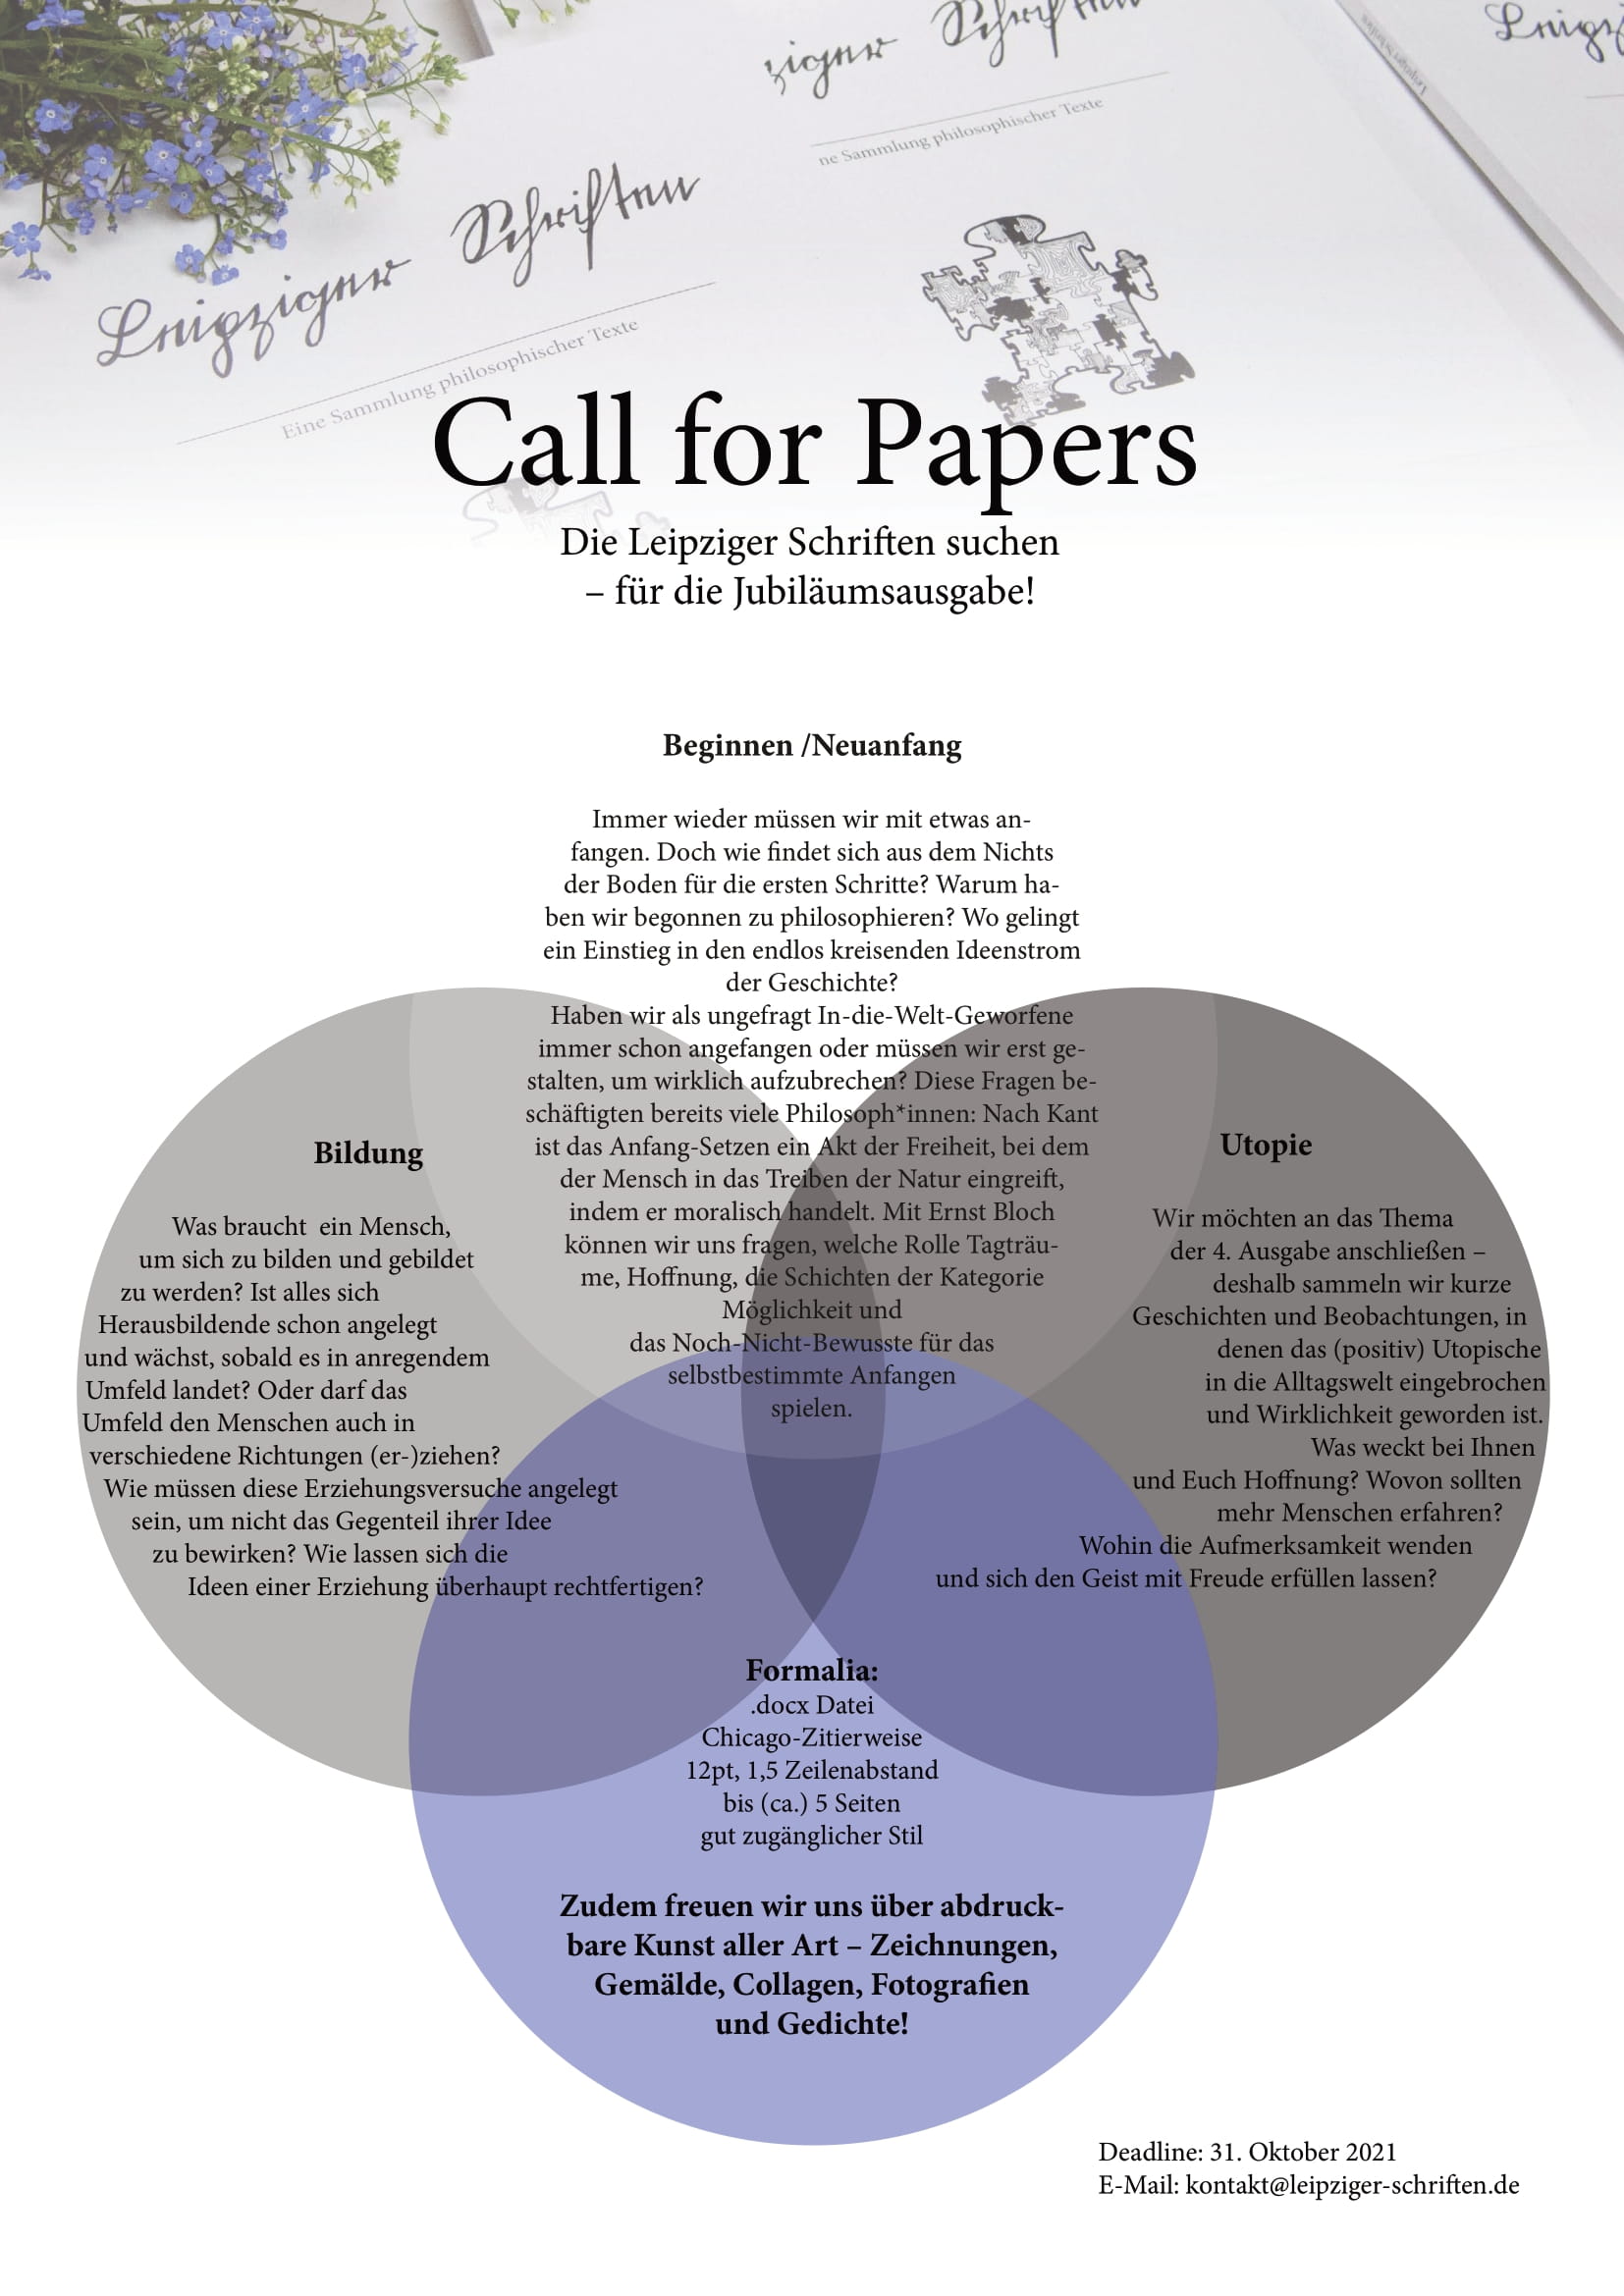 Leipziger Schriften - Call for Papers